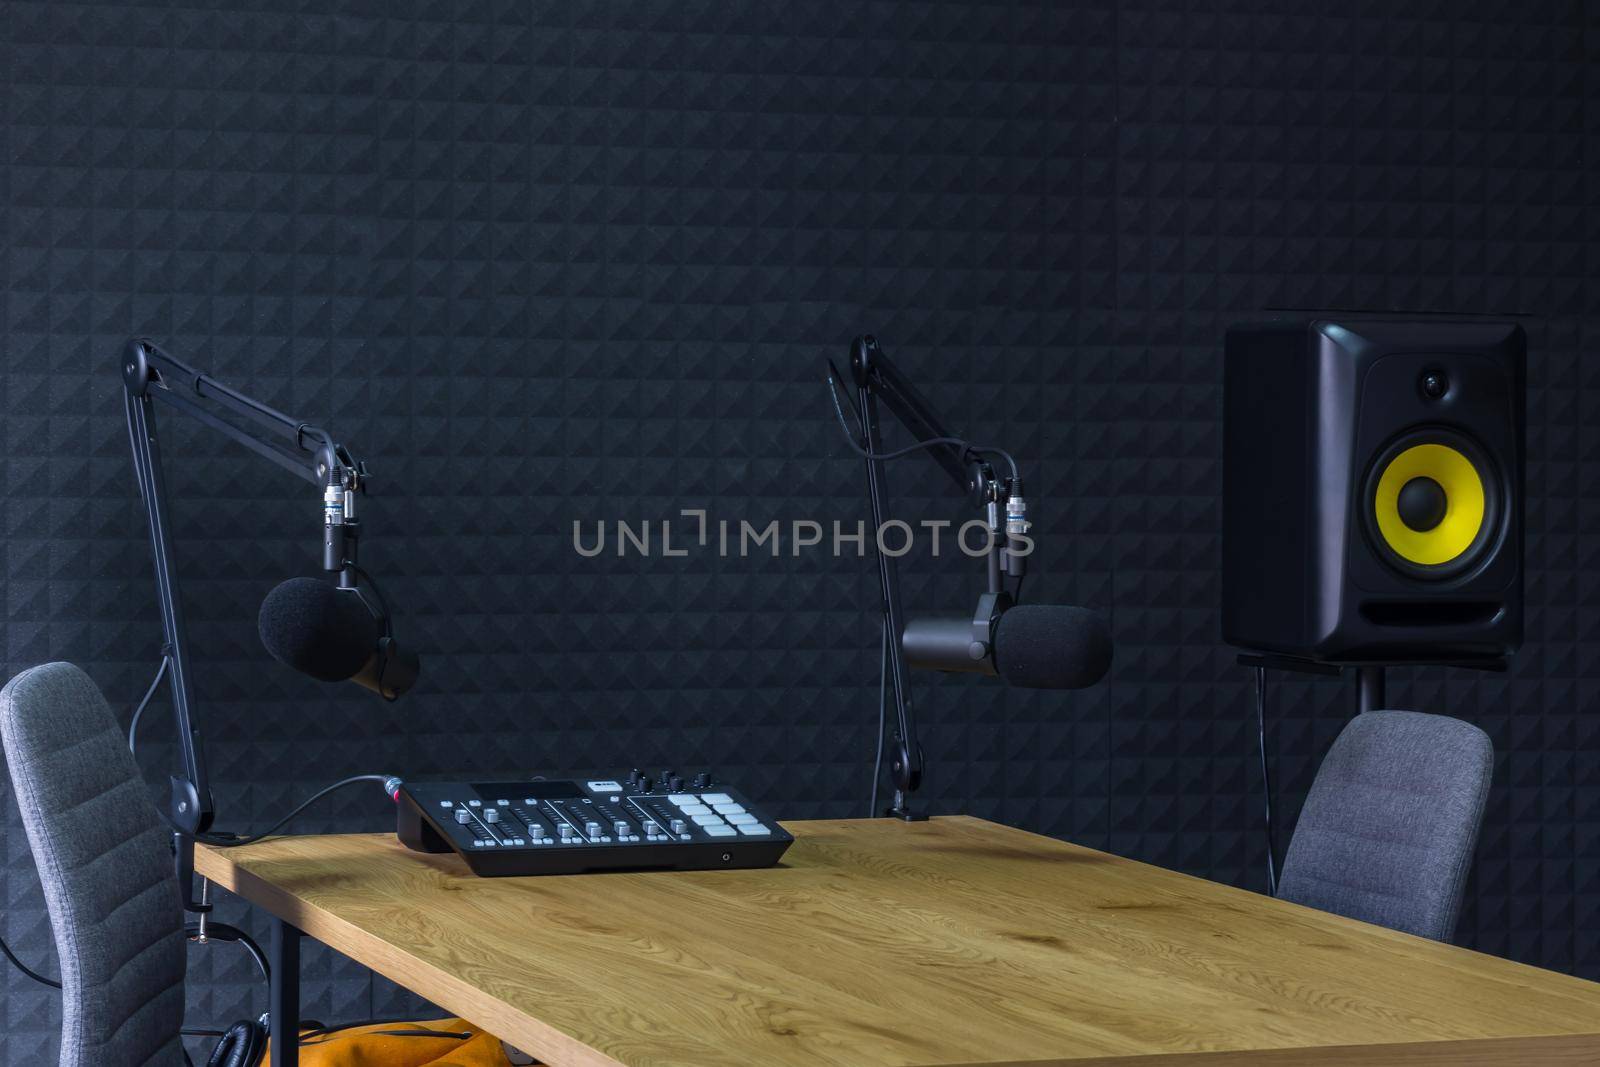 Podcast recording studio, with microphones and equalizer for recording online radio broadcasts, with black soundproof wall